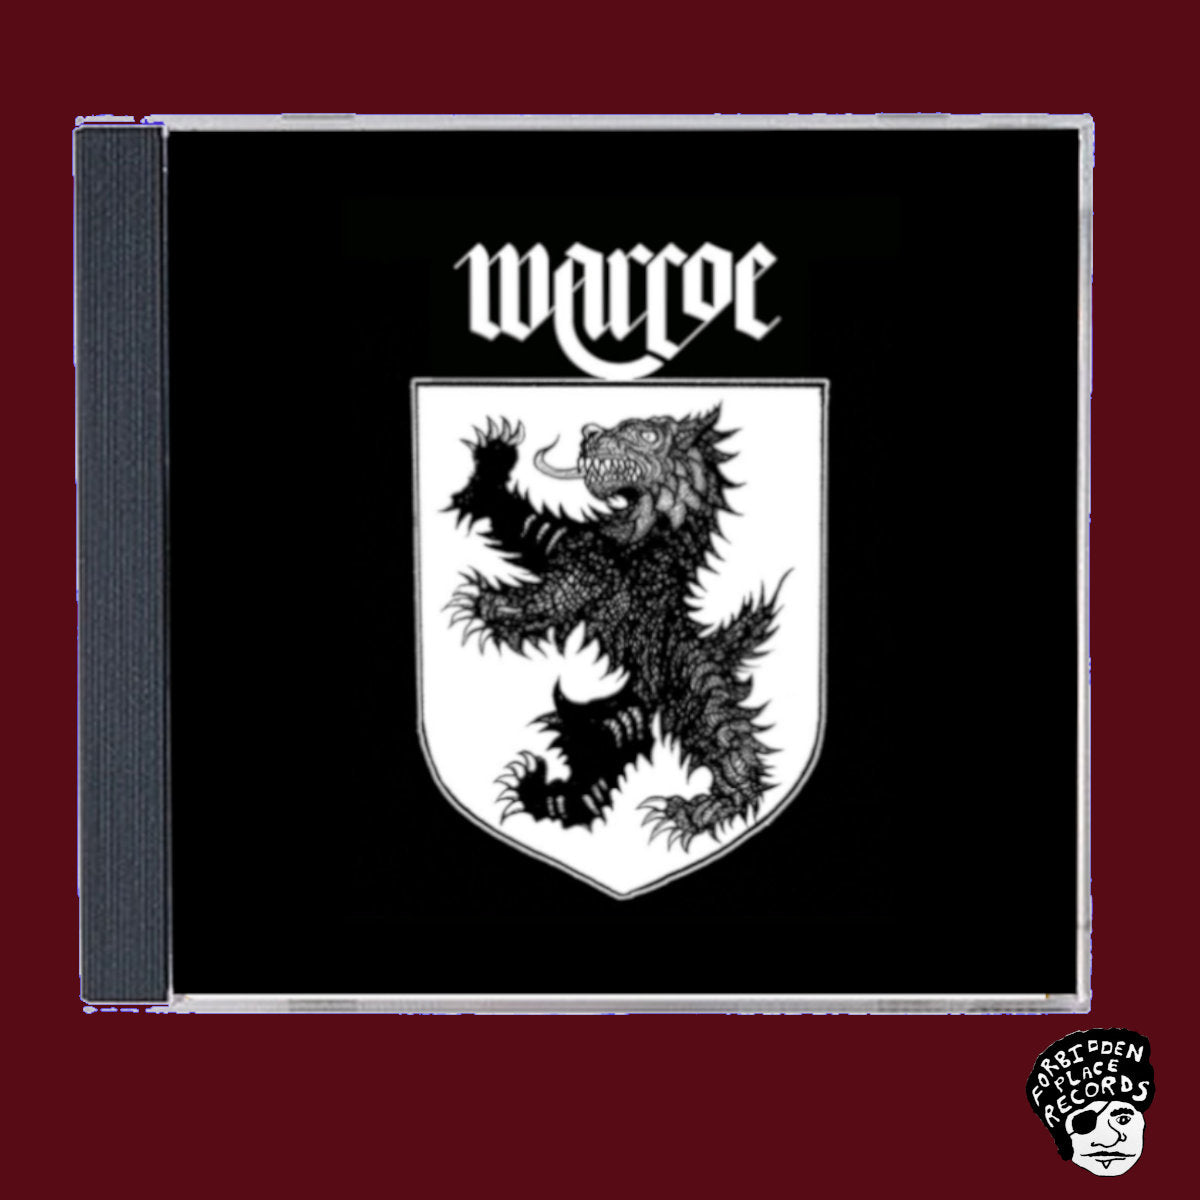 Warcoe  - "The Giant's Dream" Compact Disc